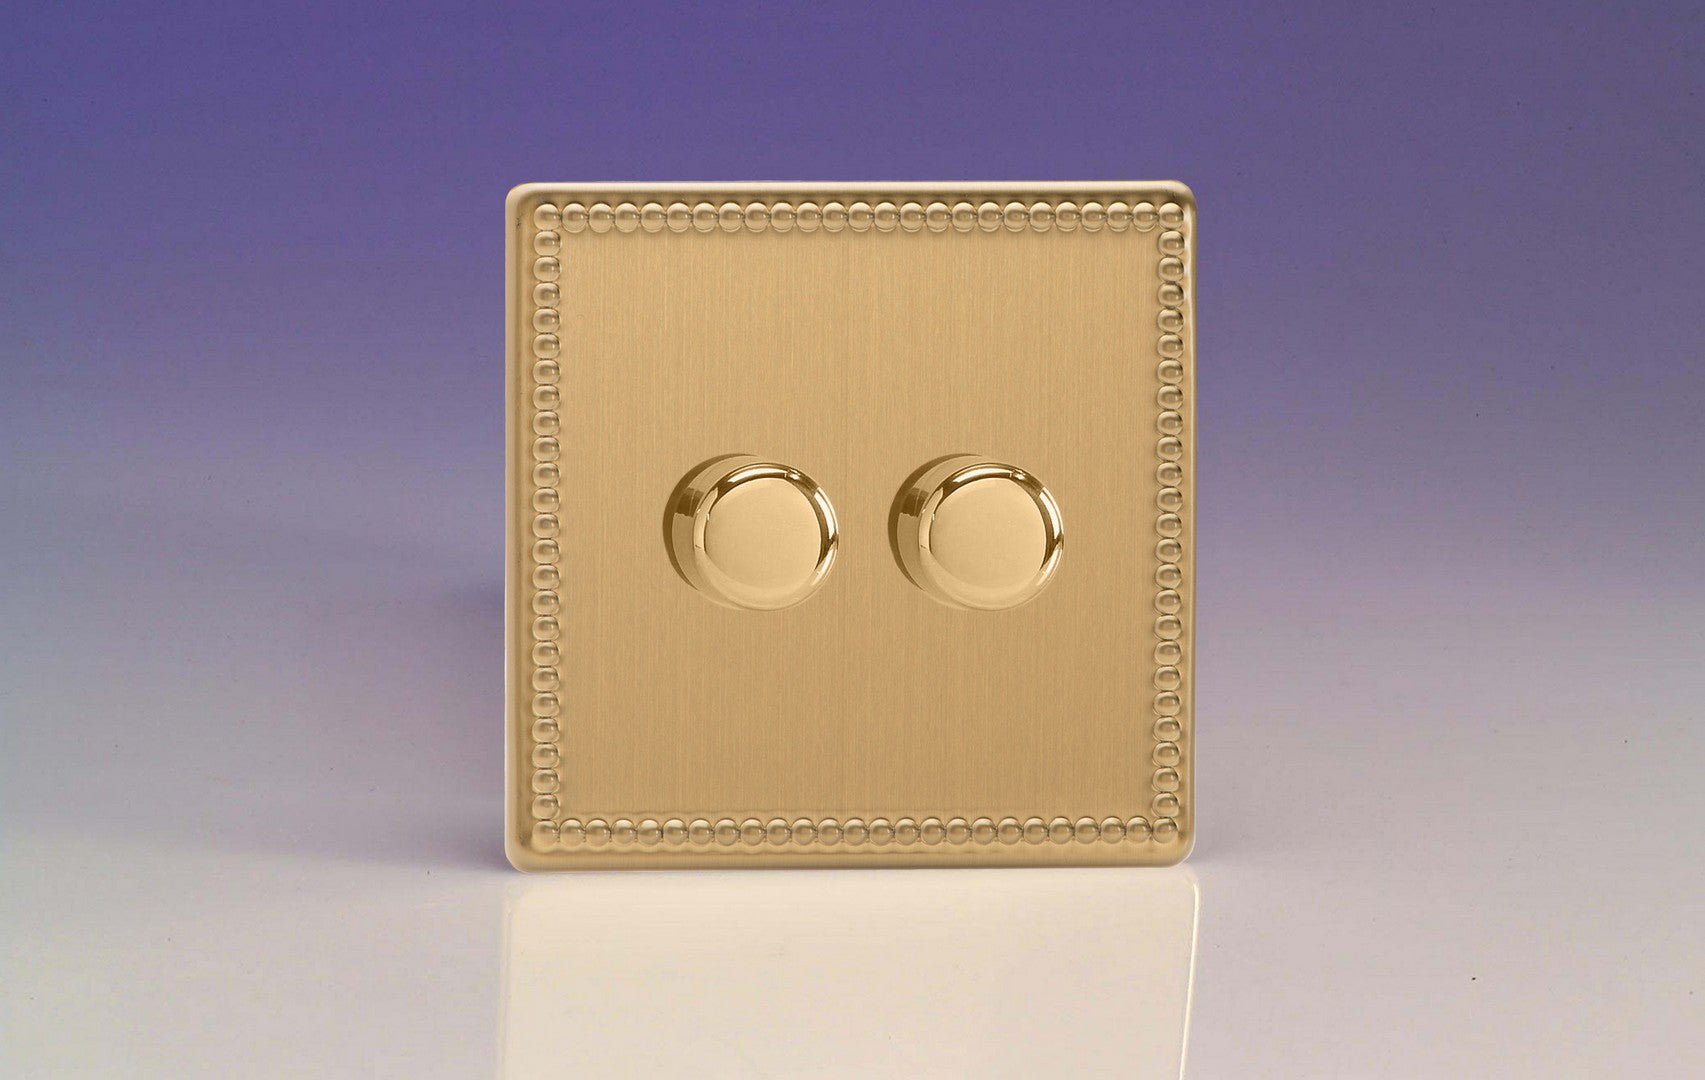 Varilight HDY83S.JB Jubilee Brushed Brass 2-Gang 2-Way Push-On/Off Rotary Dimmer 2 x 60-400W